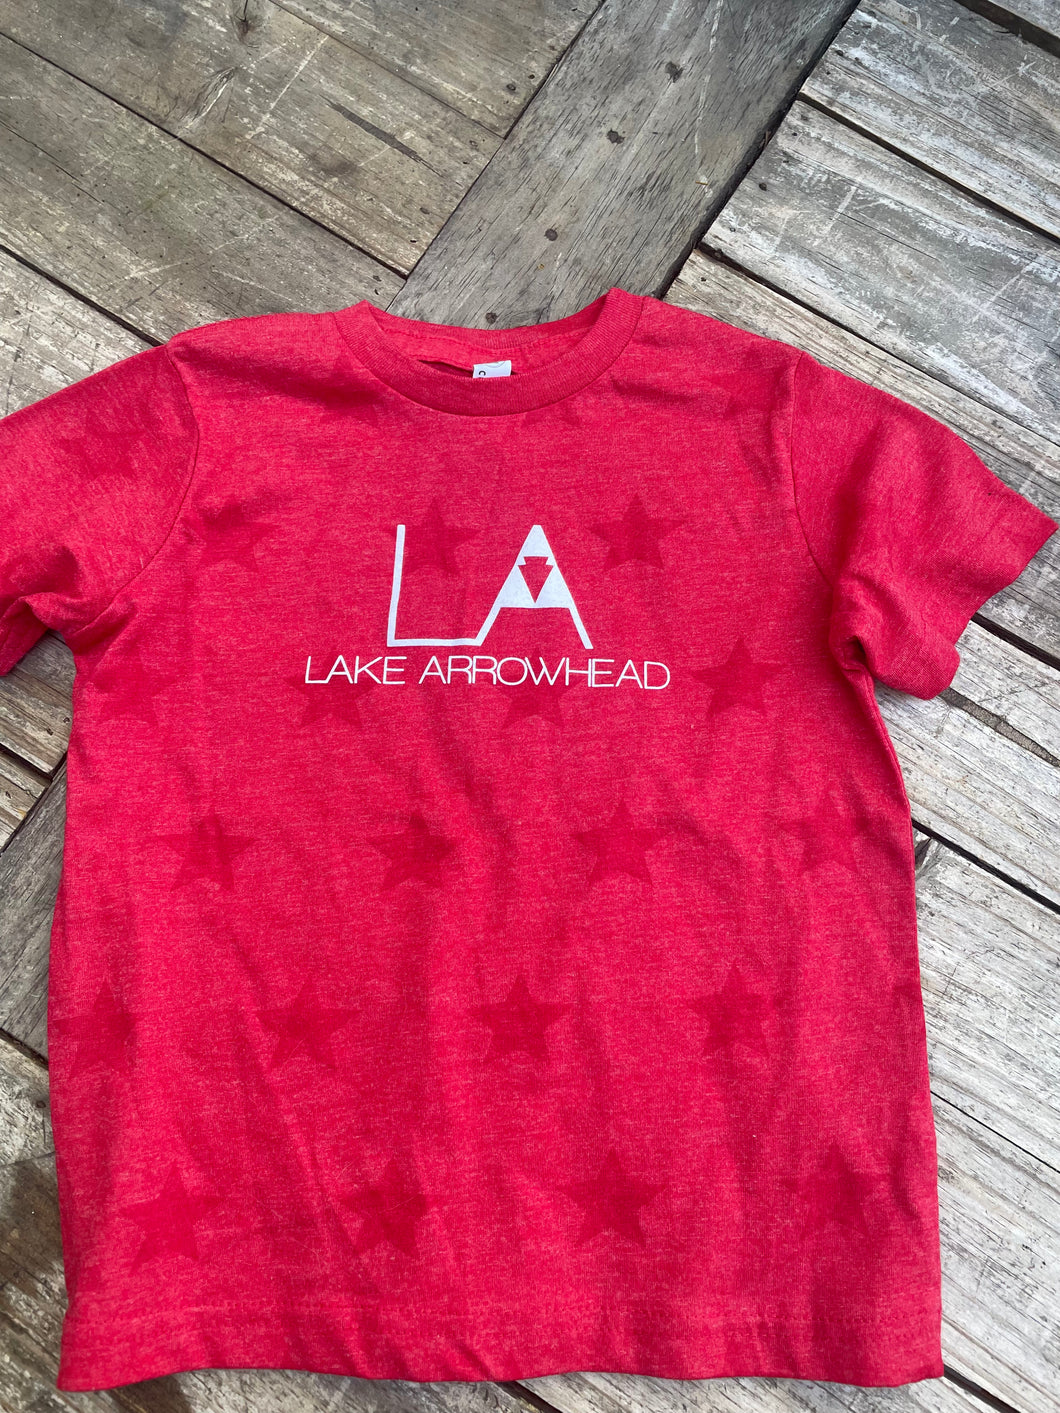 LAKE ARROWHEAD (TODDLER AND YOUTH): Red Star Shirt *LIMITED SIZES*